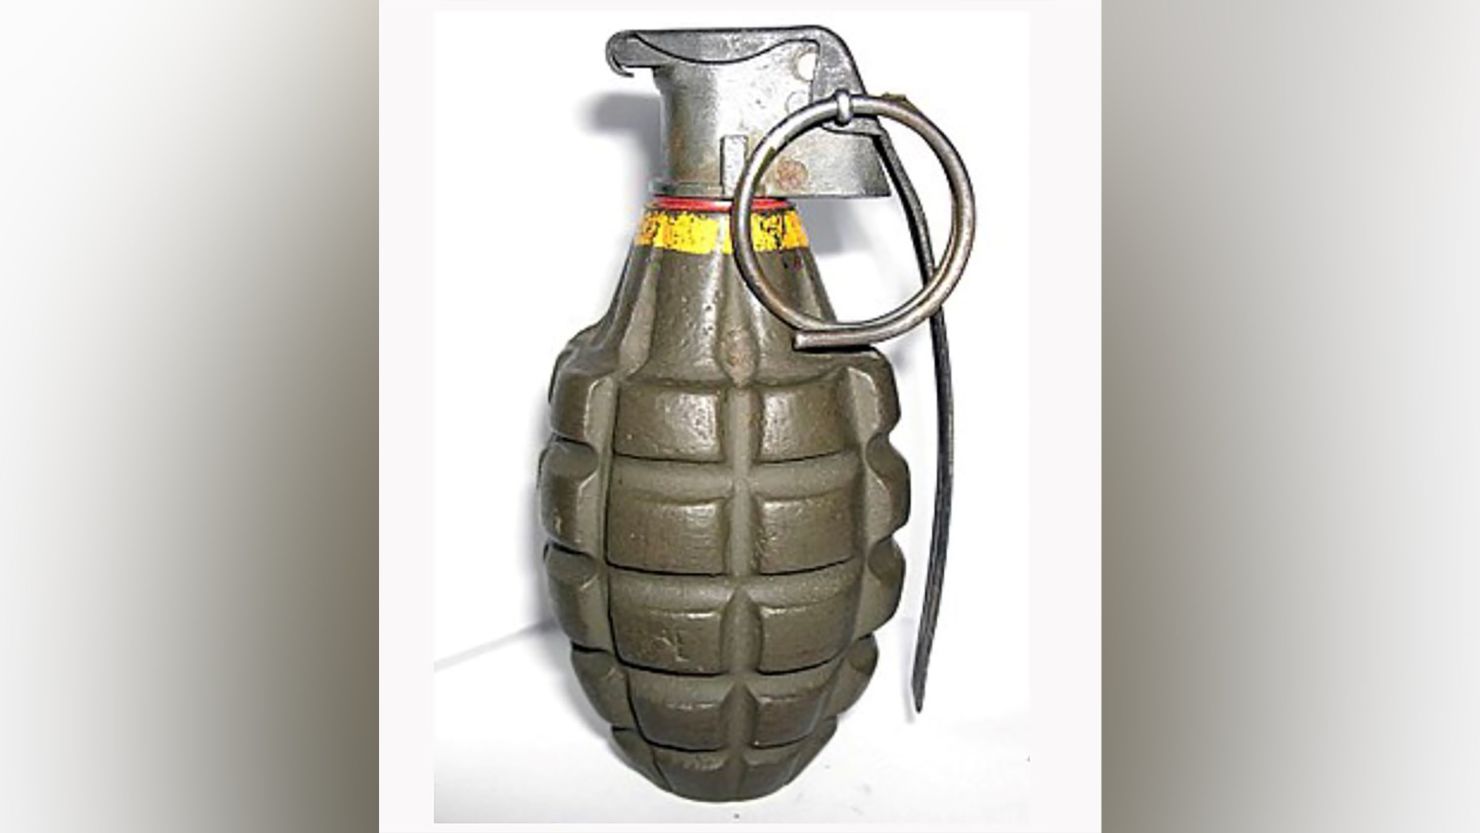 ATF is asking for the public's help to recover any grenades that may have been purchased from Fancy Flea Antique Mall in Shallotte, North Carolina, because they may be live.